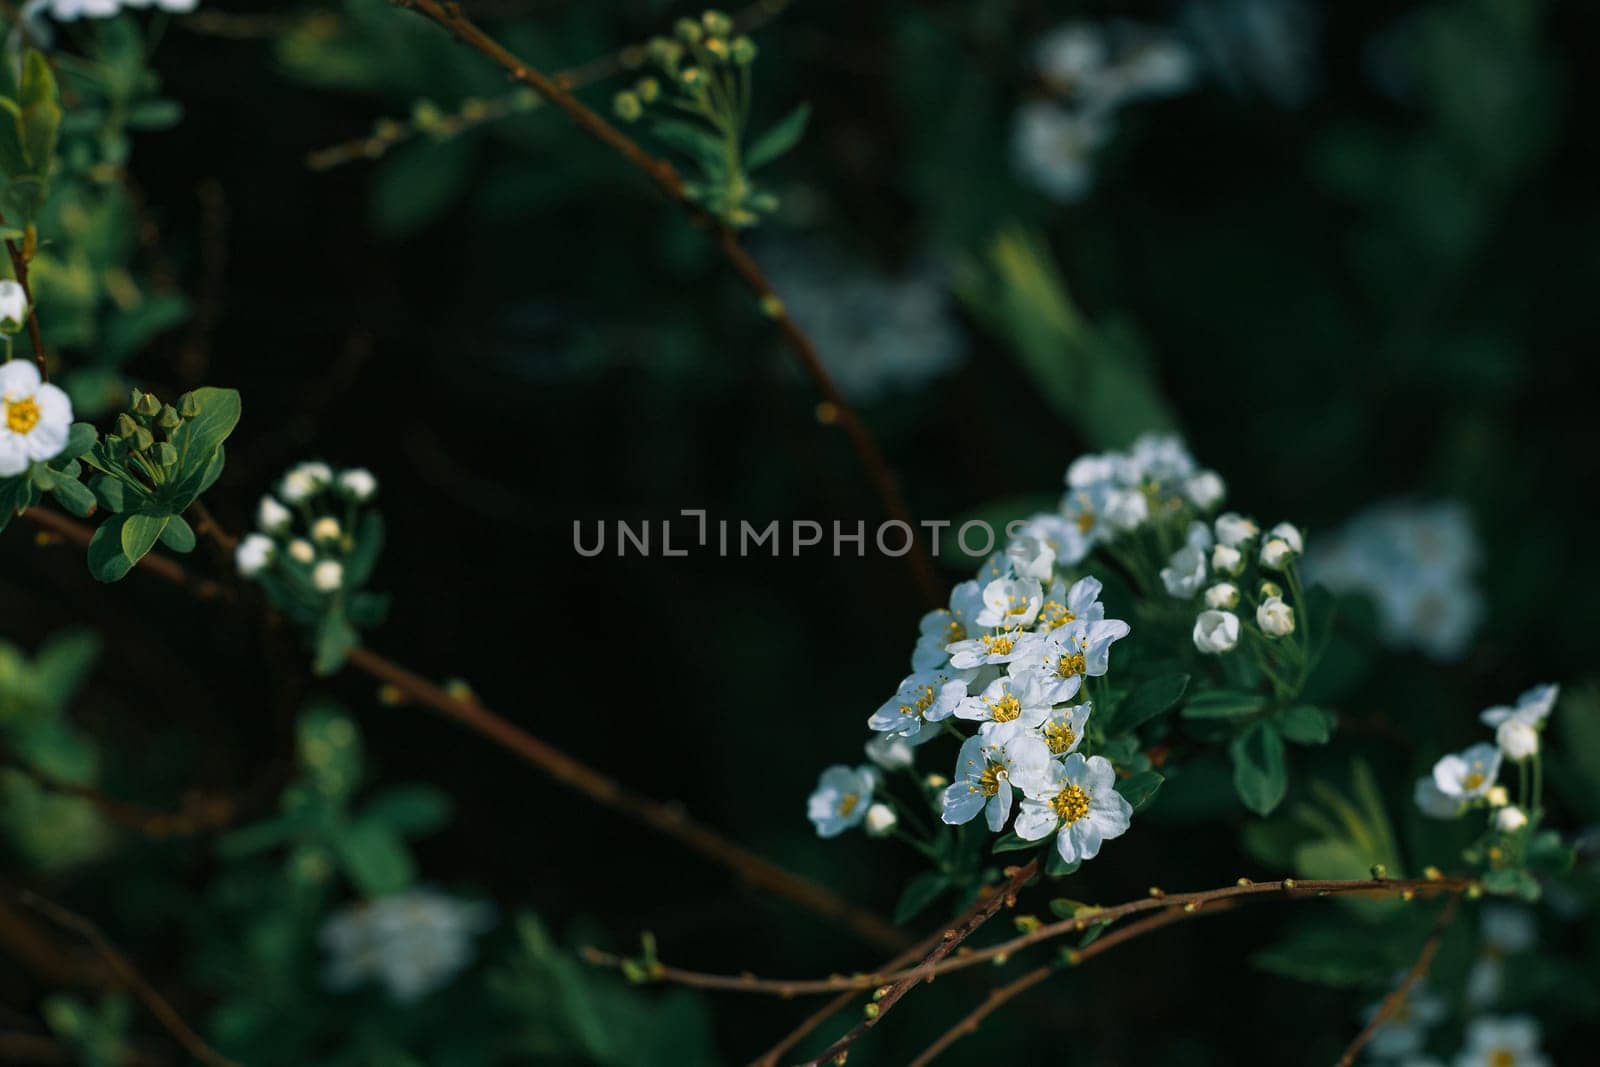 A close up of a bunch of white flowers on a branch. The flowers are small and white, and they are surrounded by green leaves. The image has a peaceful and calming mood